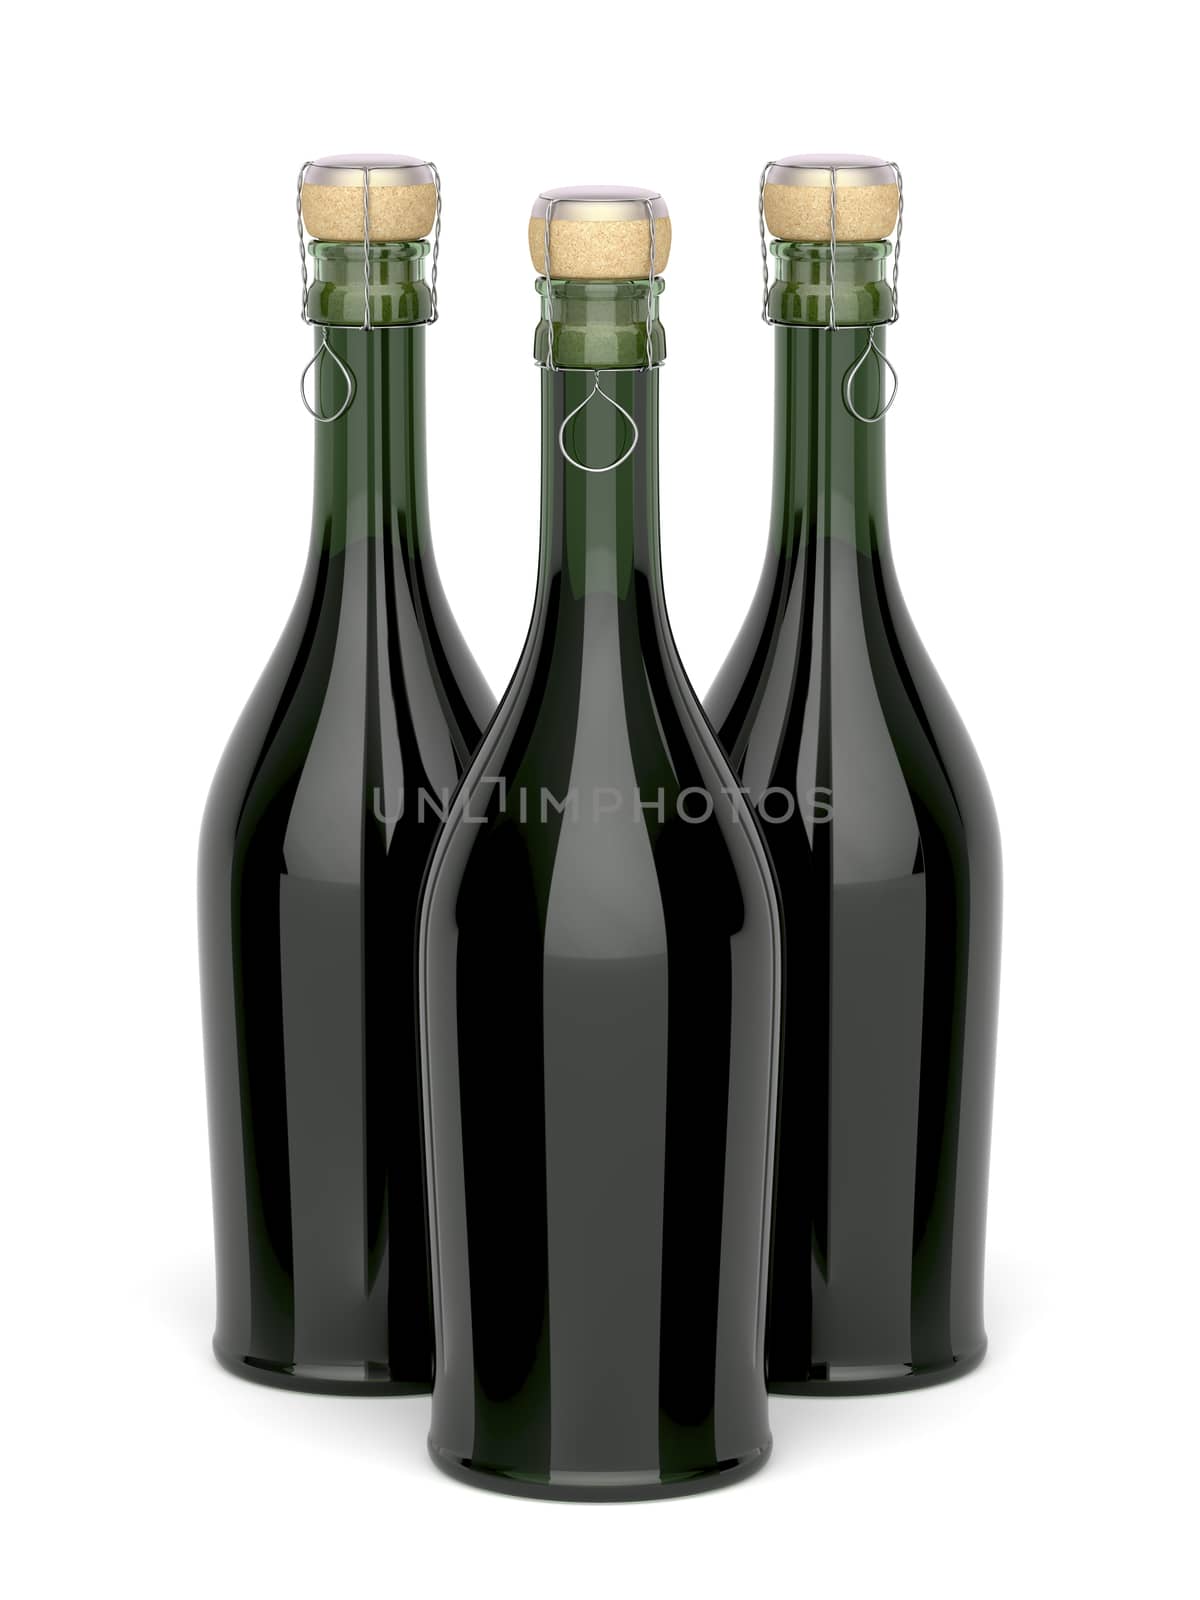 Three champagne bottles by magraphics